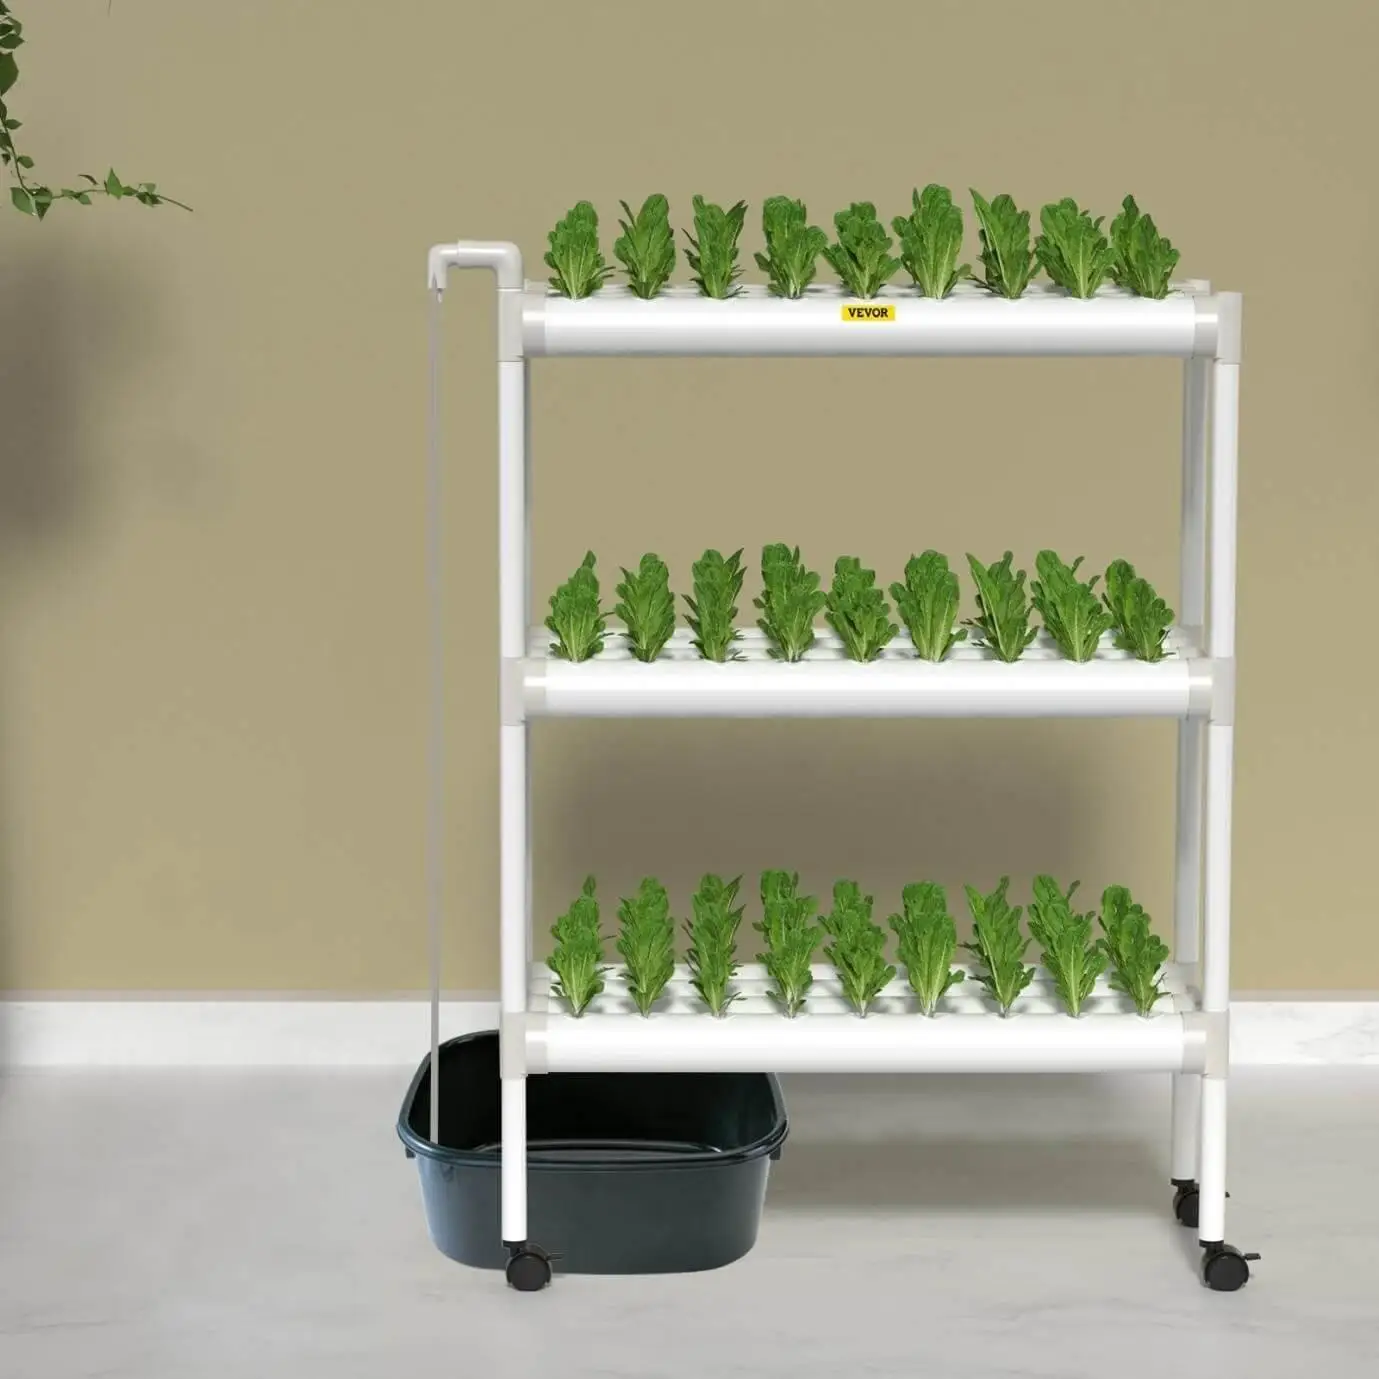 vevor-hydroponics-growing-system-in-use